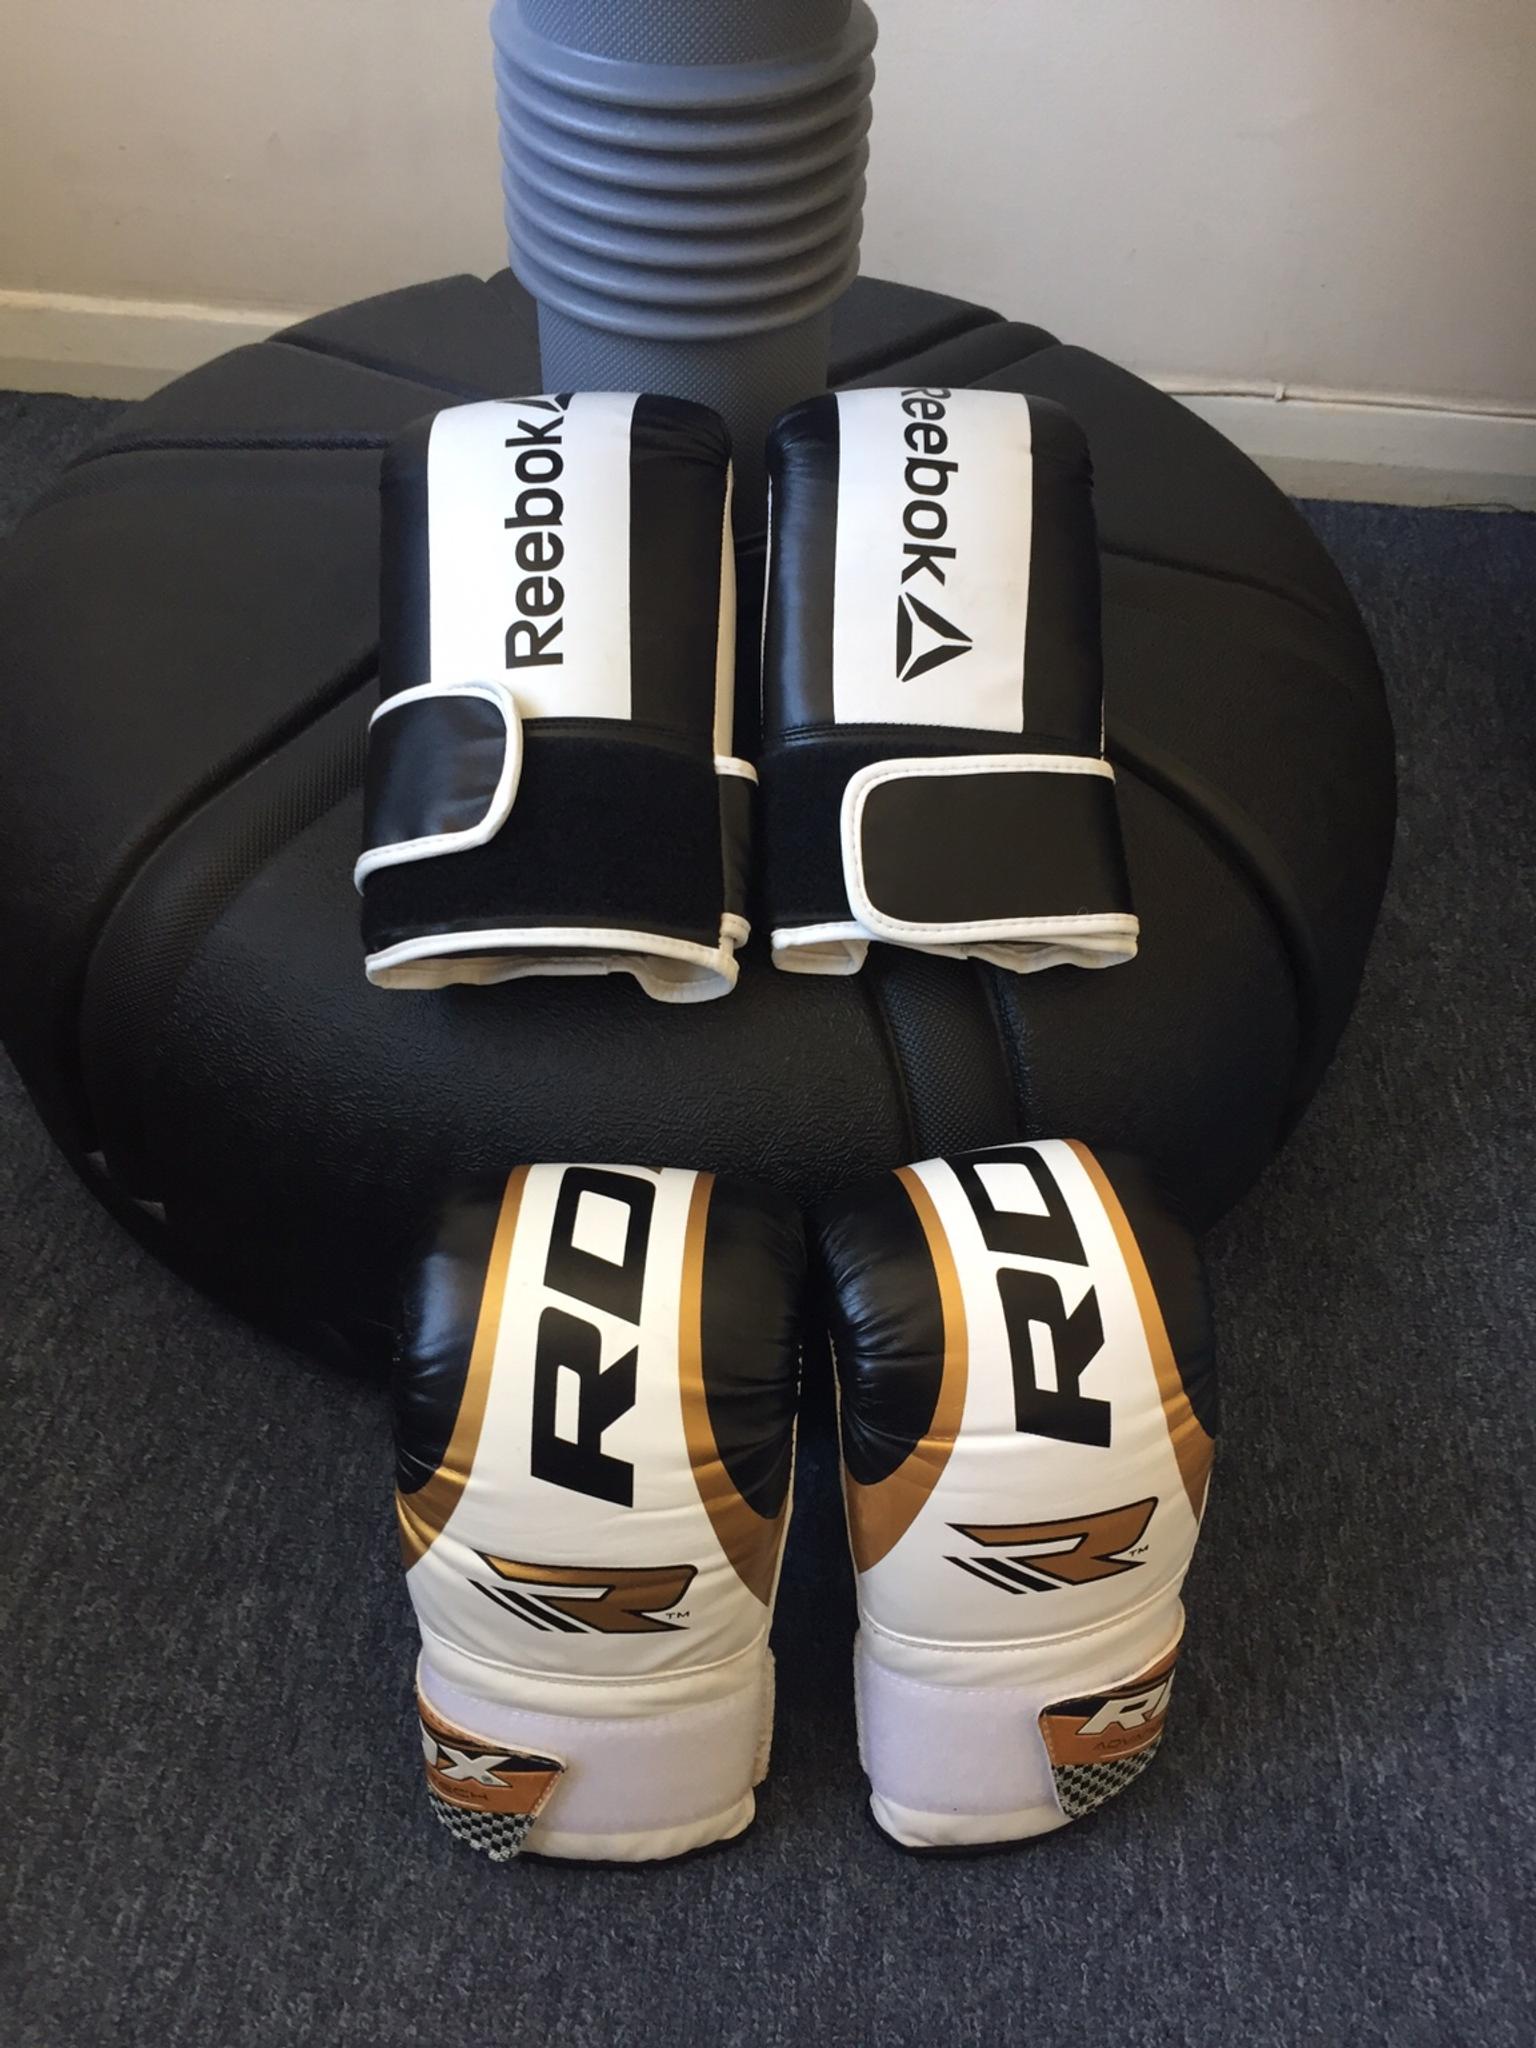 reebok mma tube trainer review